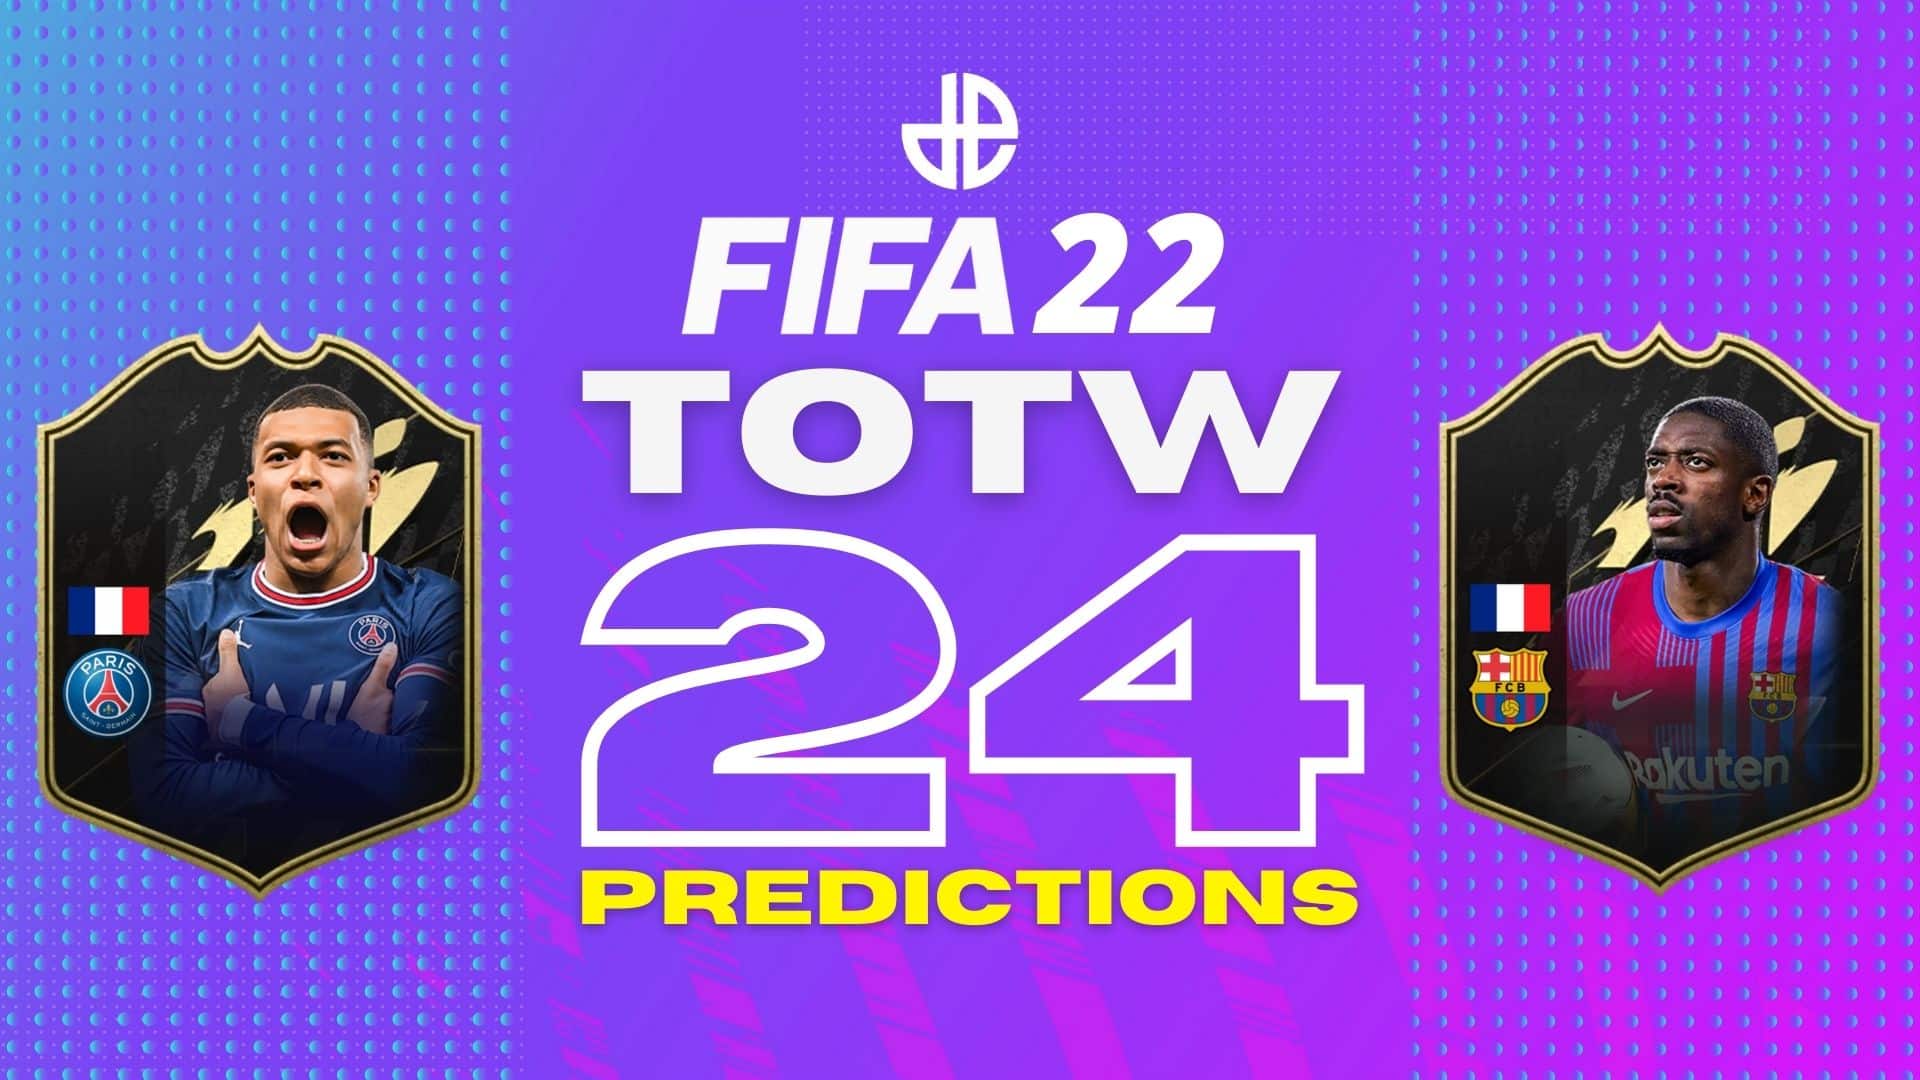 FIFA 22 TOTW 24 cards and predictions